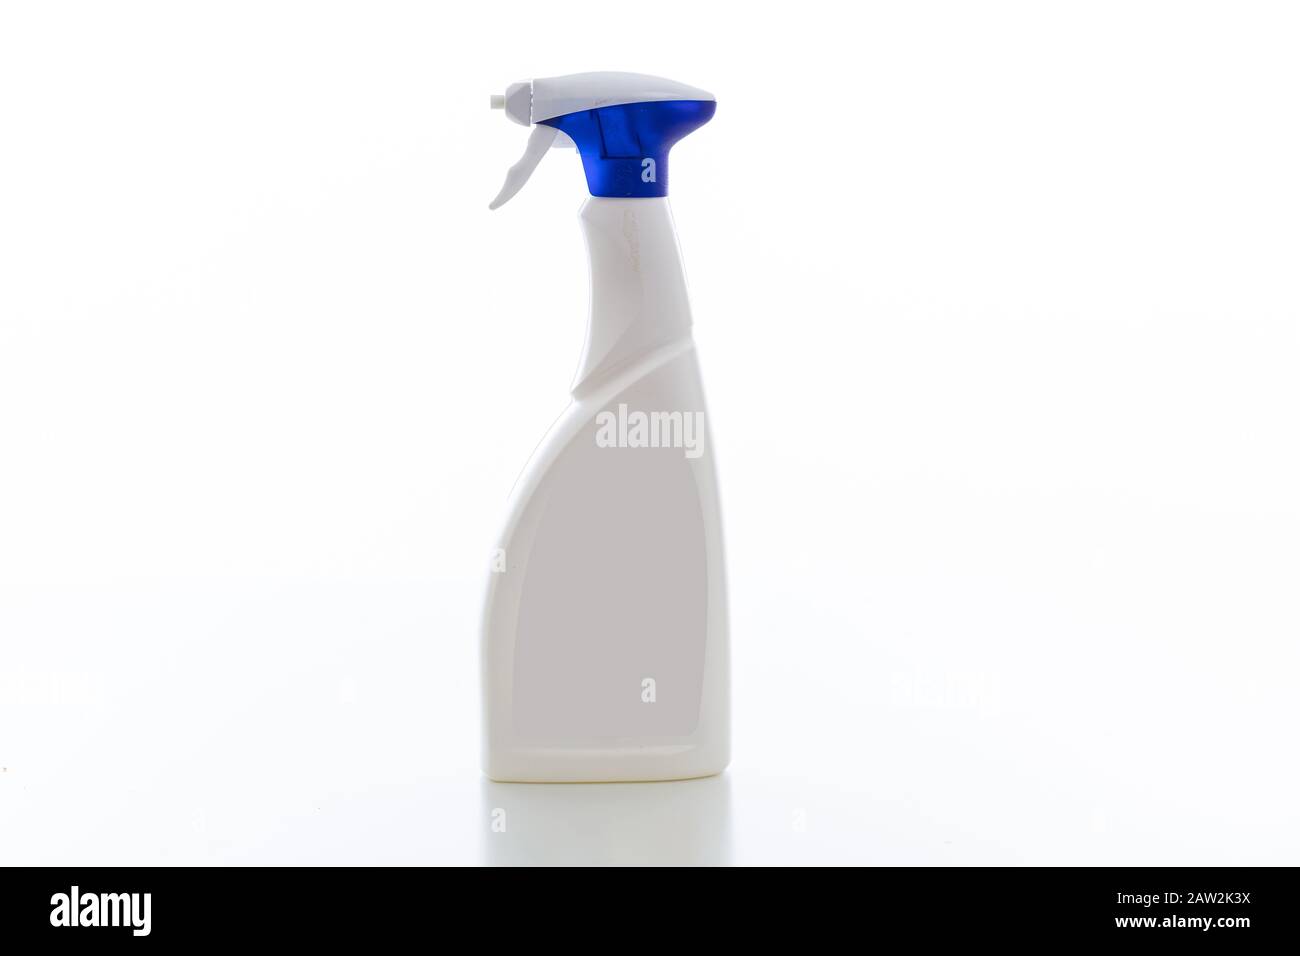 Cleaning spray bottle with blue trigger isolated against white background. Chemical detergent product no name template, blank empty label, copy space Stock Photo